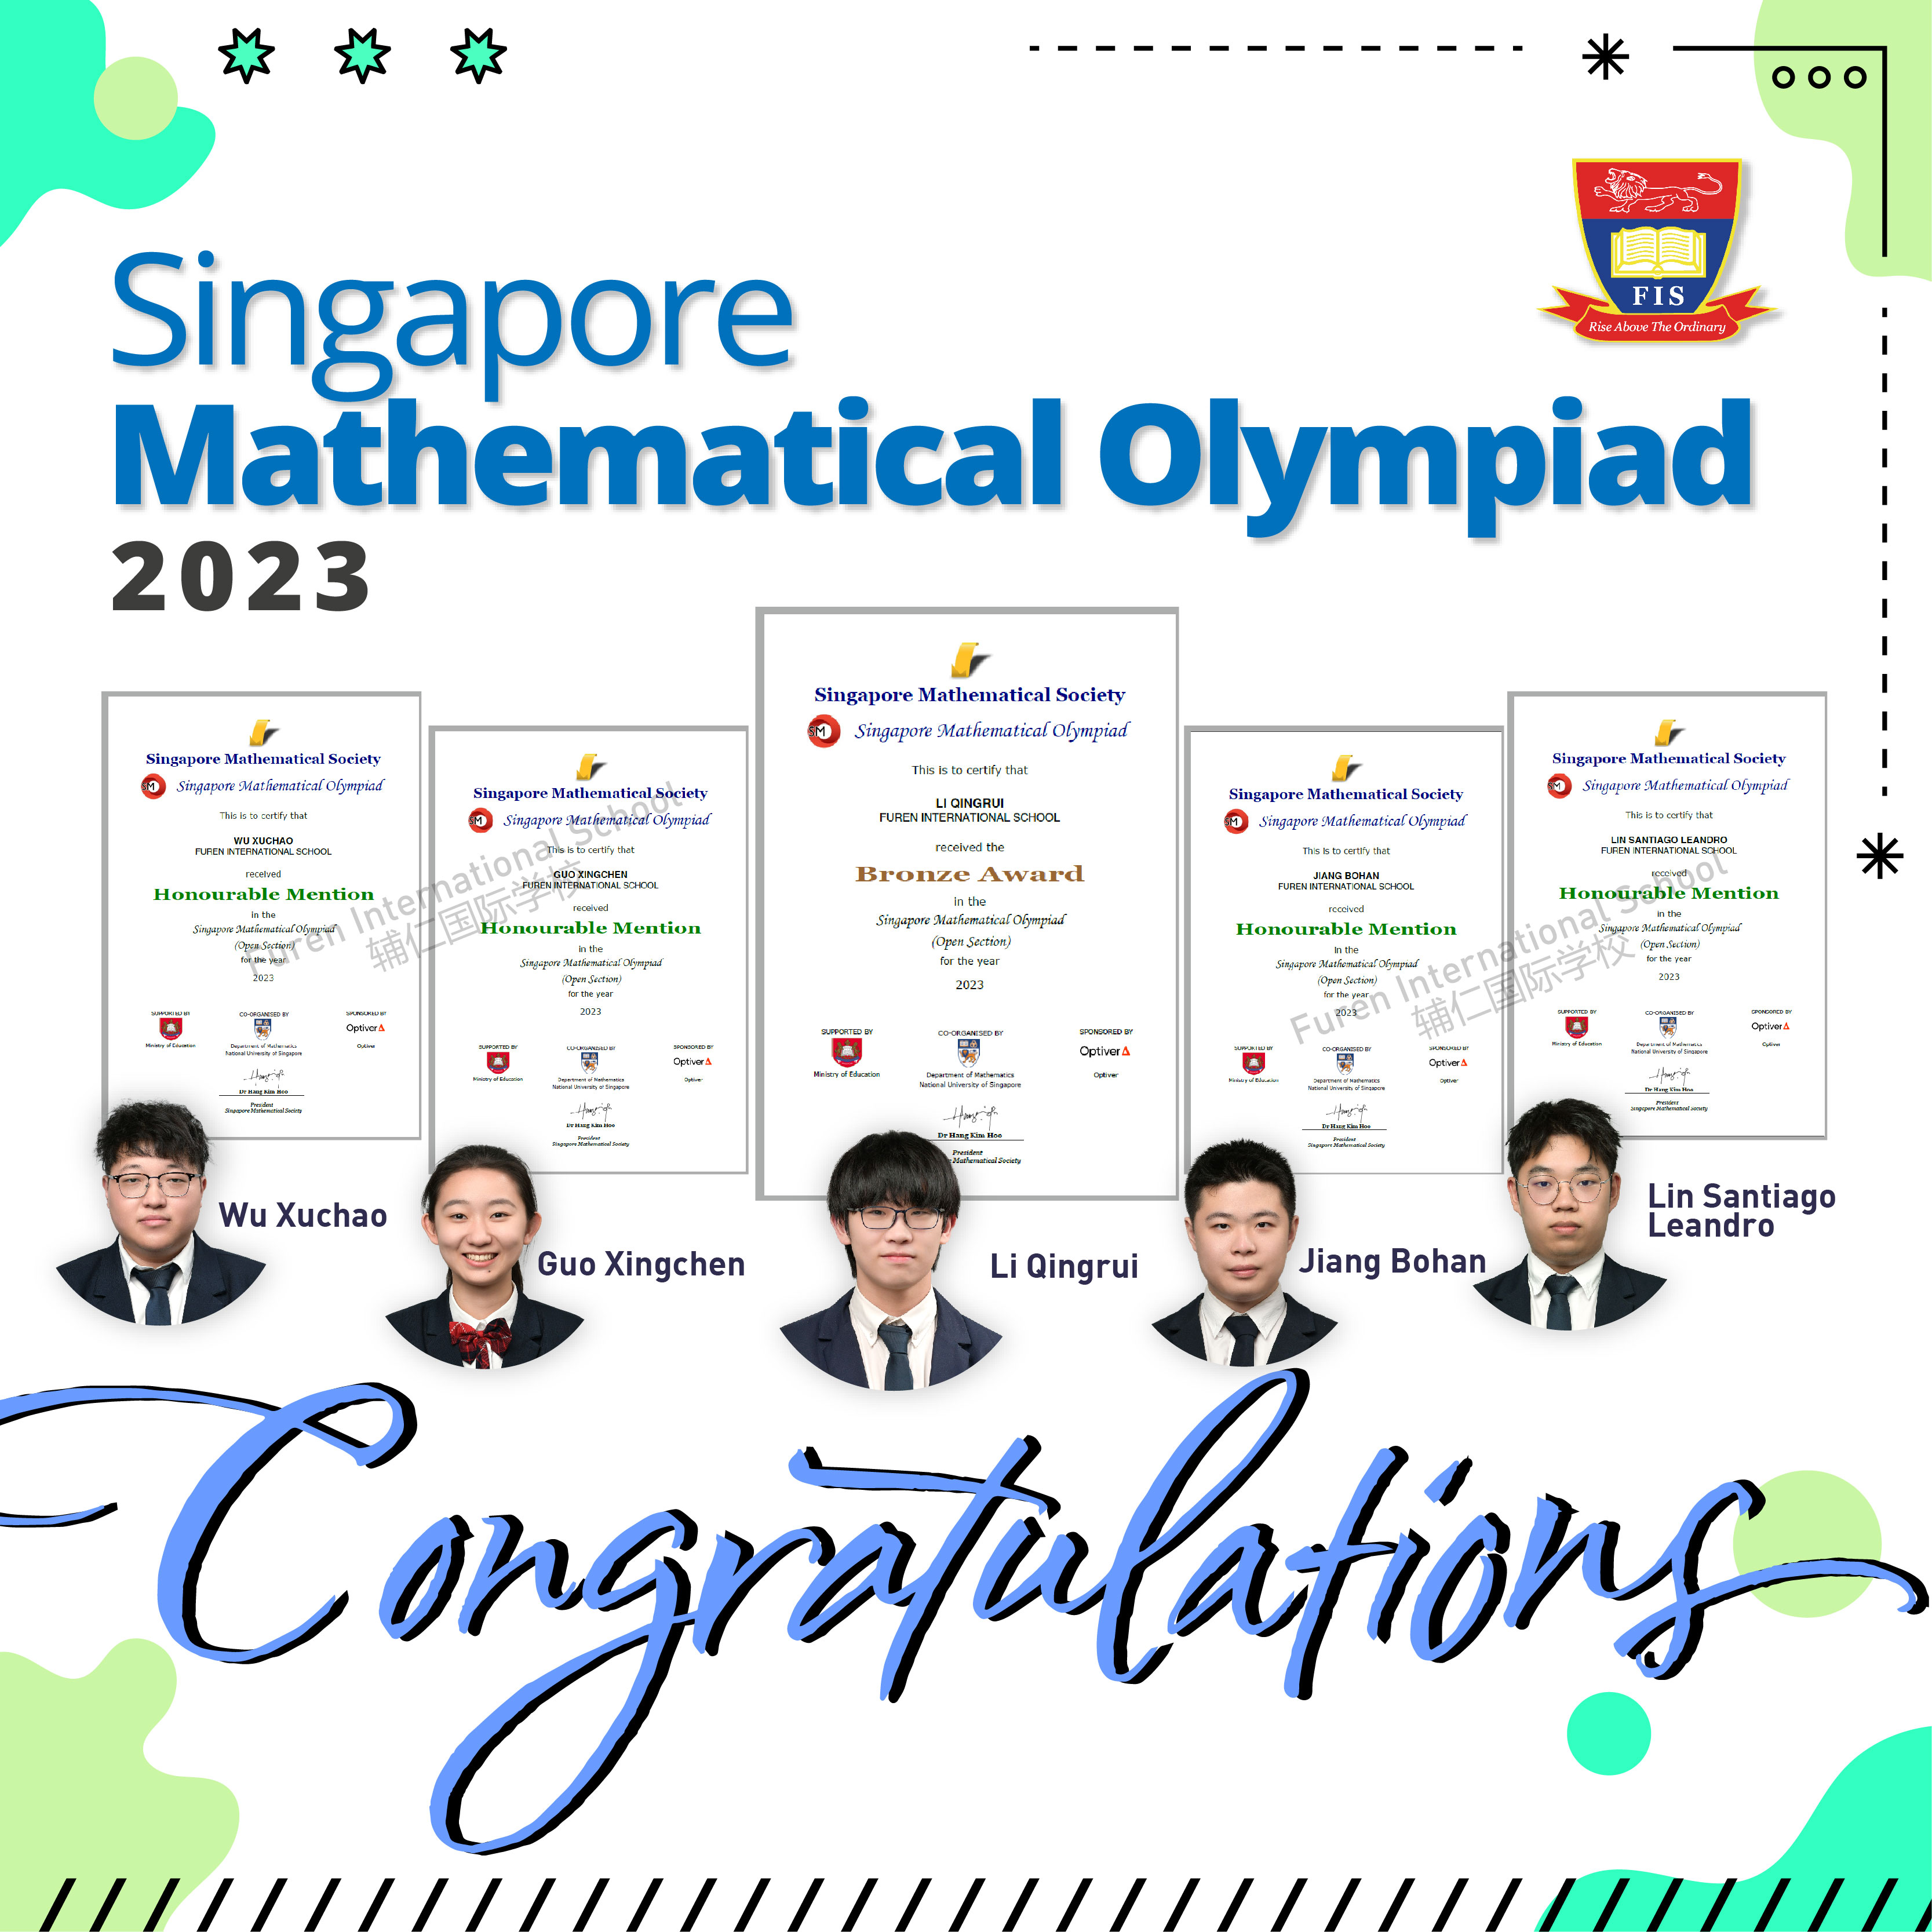 Singapore Mathematical Olympiad (SMO) 2023 results